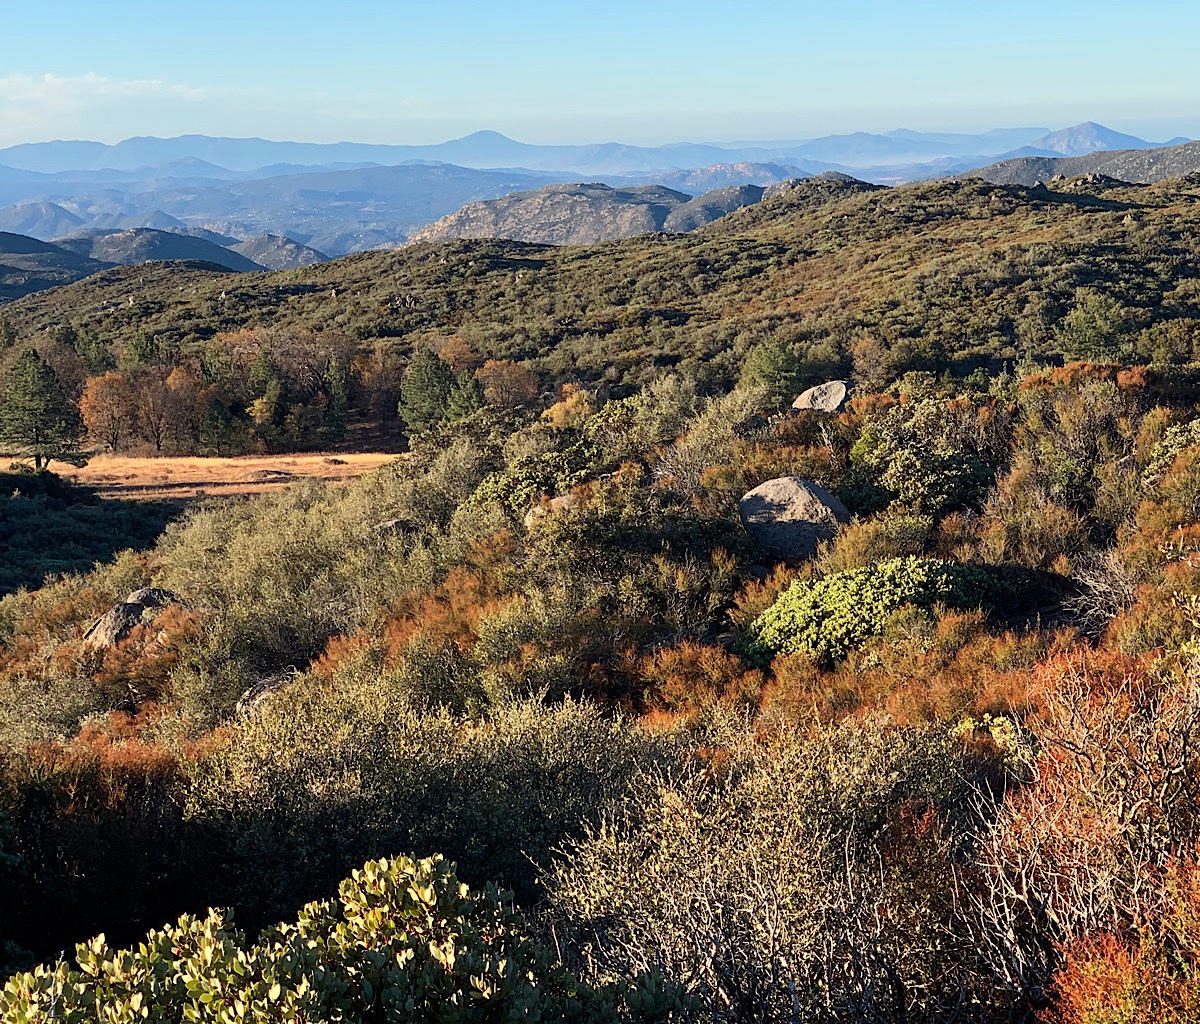 The trail leaves the forest and heads to exposed scrubland. Those distant mountains are in Mexico. 